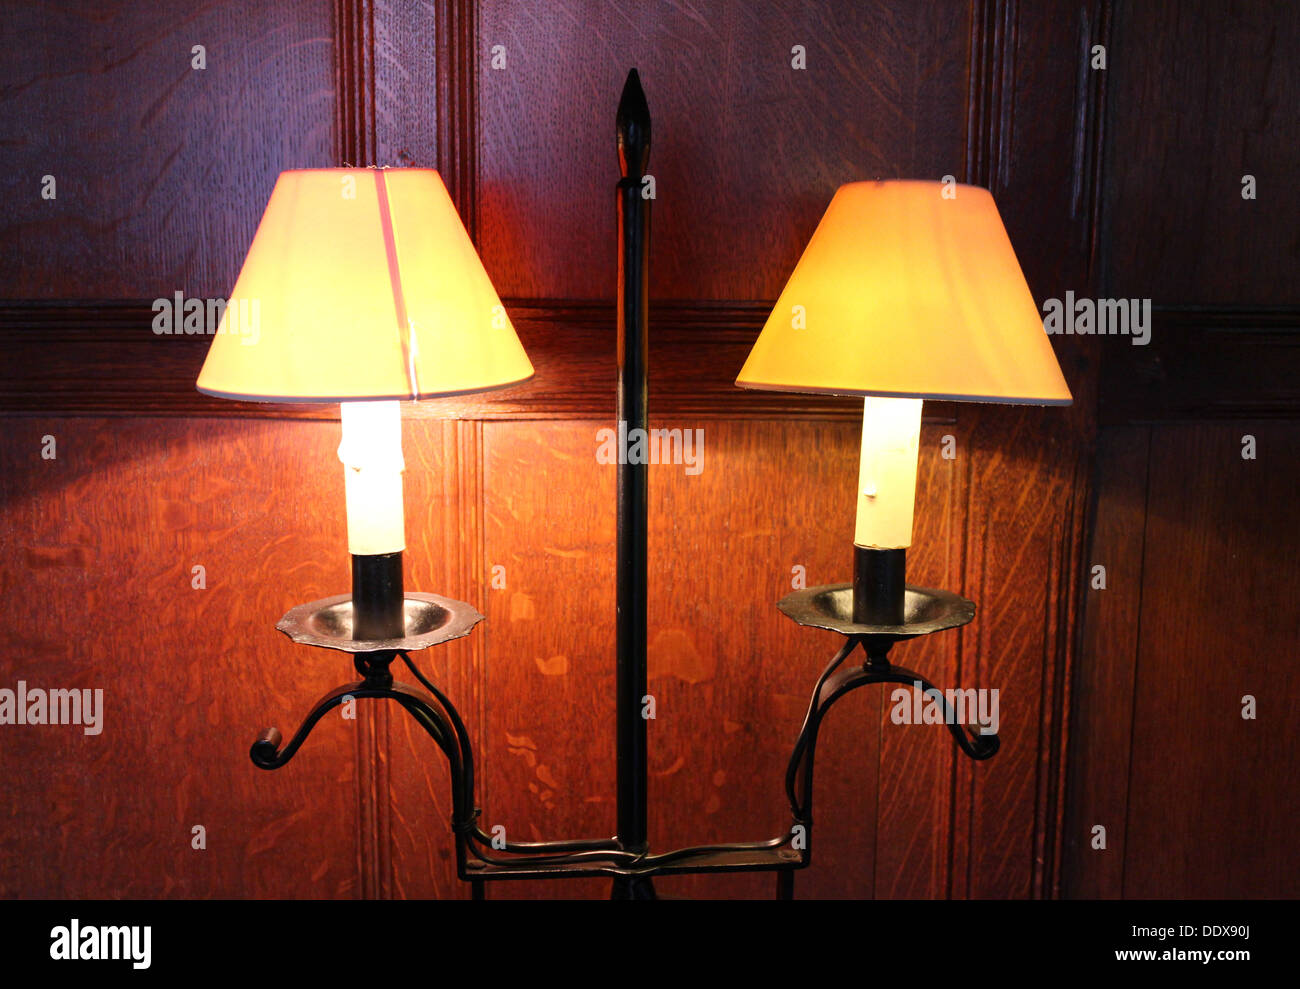 Two 1920s electric lamps wall mounted with wooden paneling in the background Stock Photo